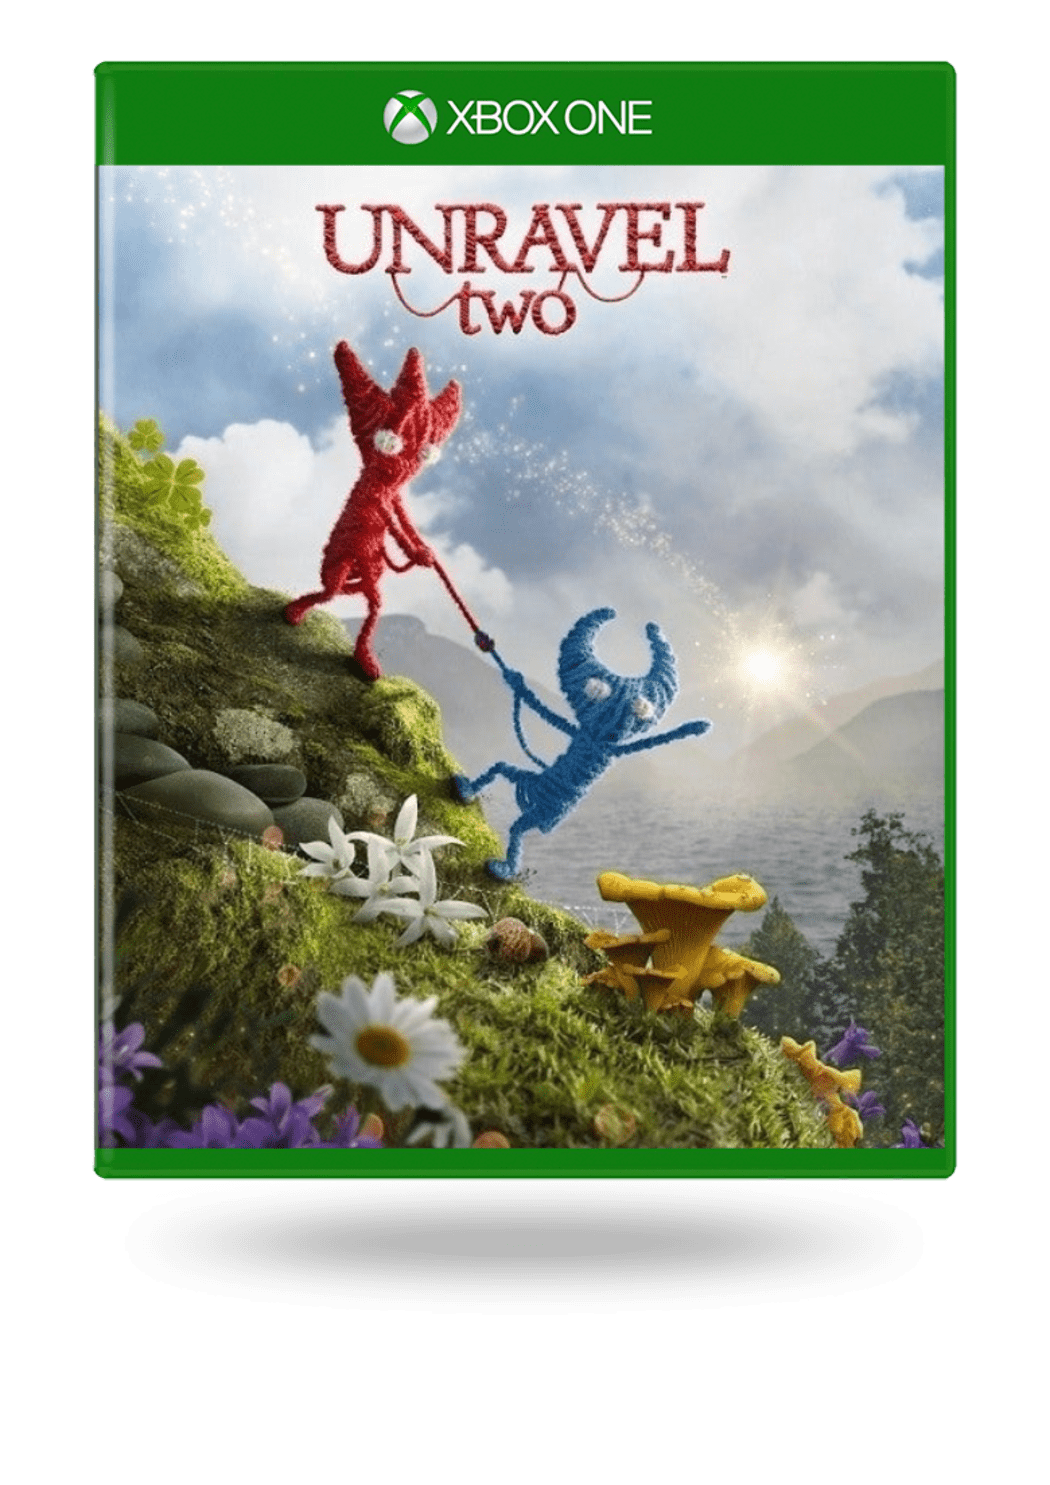 Unravel Two Xbox One Digital